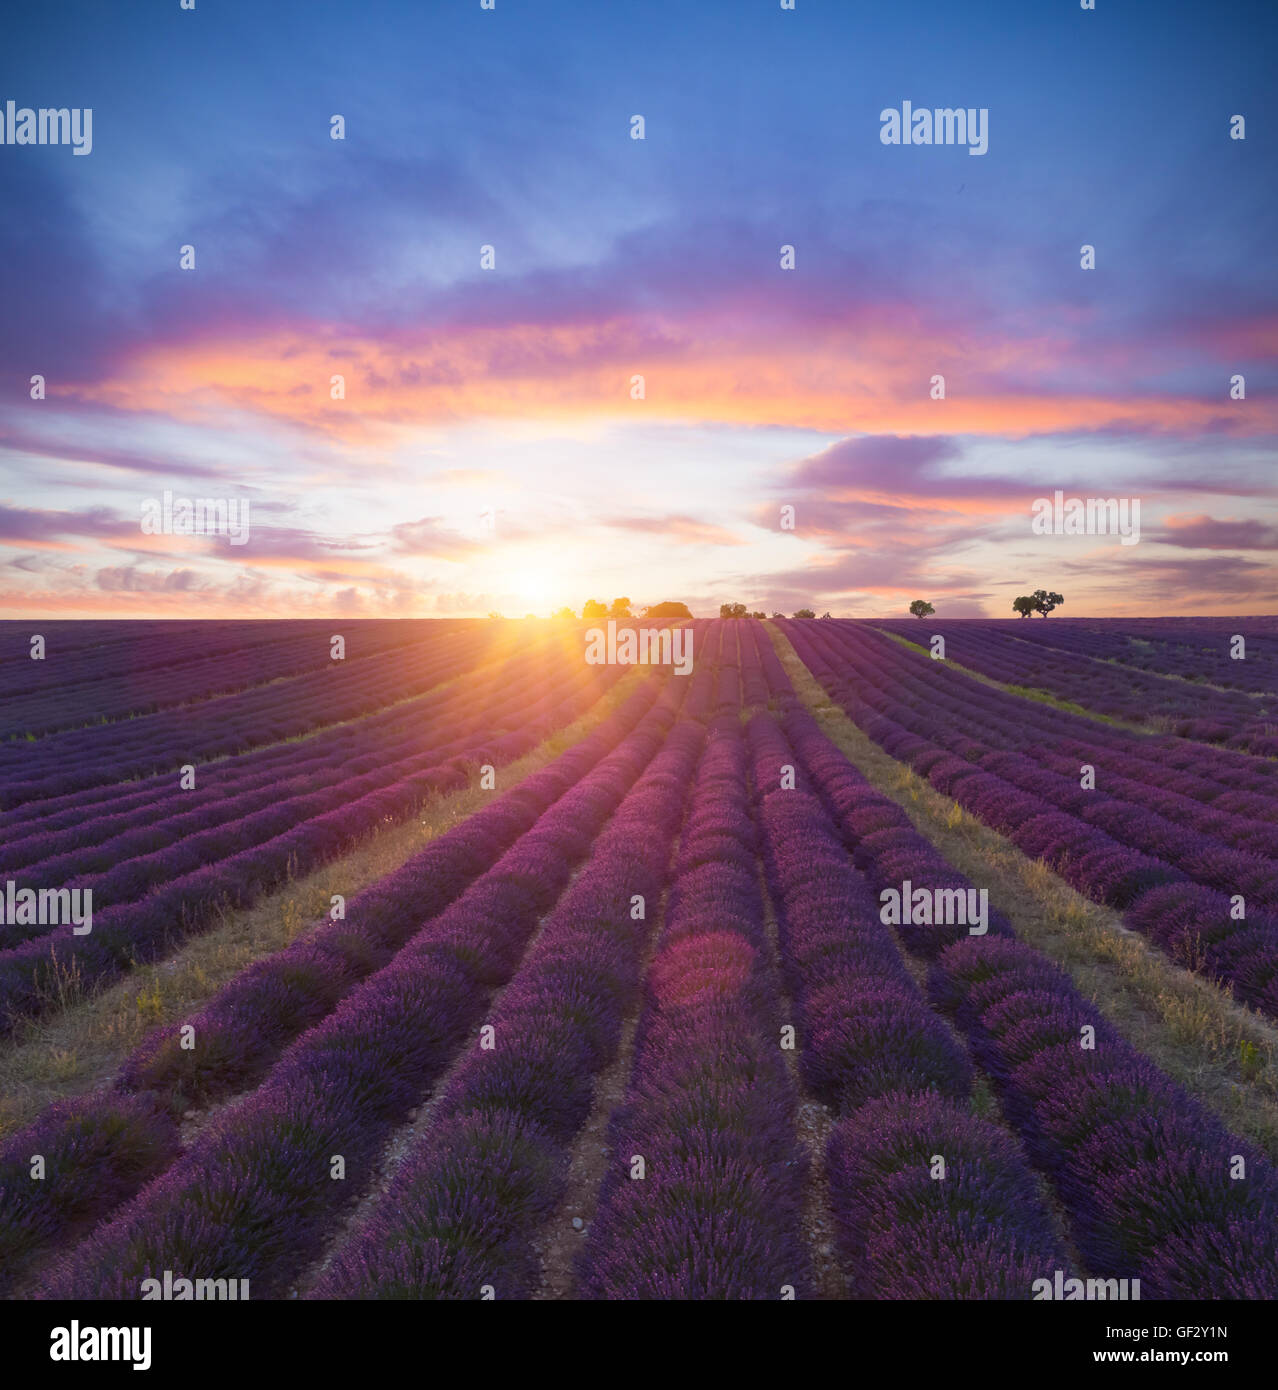 Beautiful landscape of blooming lavender field in sunset, lonely trees uphill on horizon. Provence, France, Europe. Stock Photo